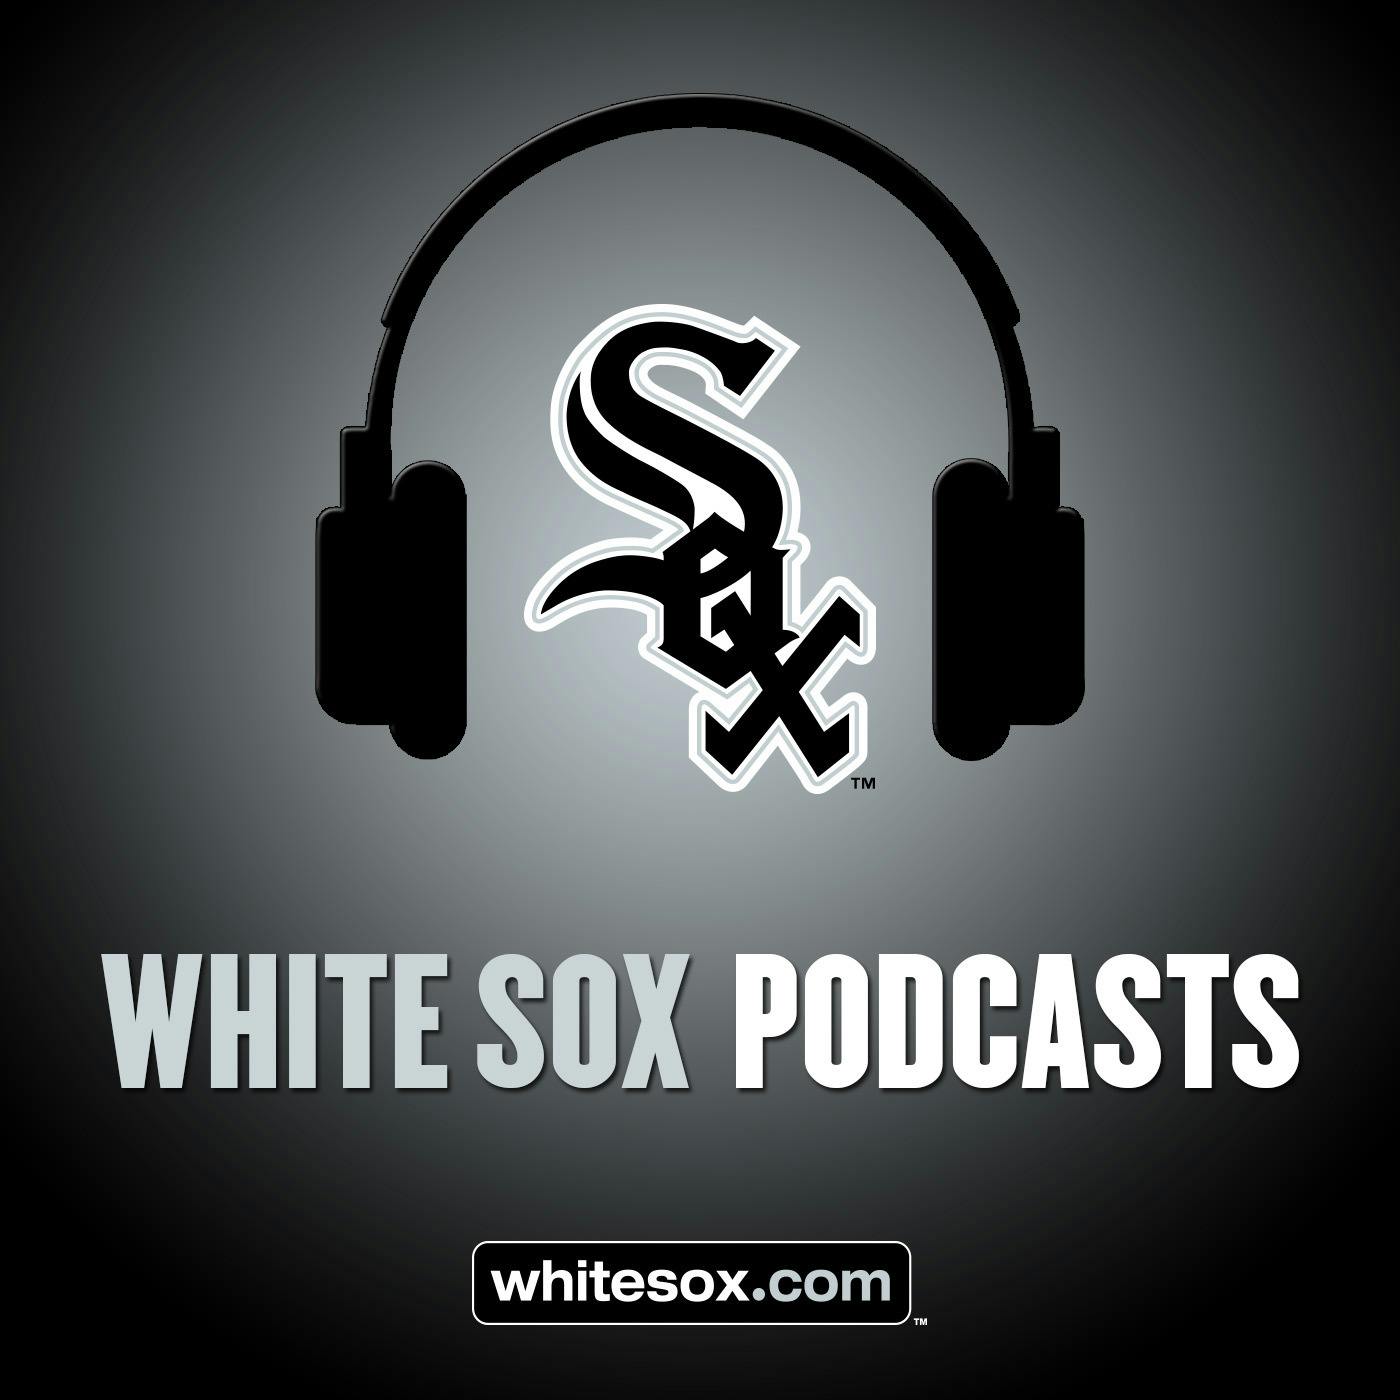 1/04/20: White Sox Weekly